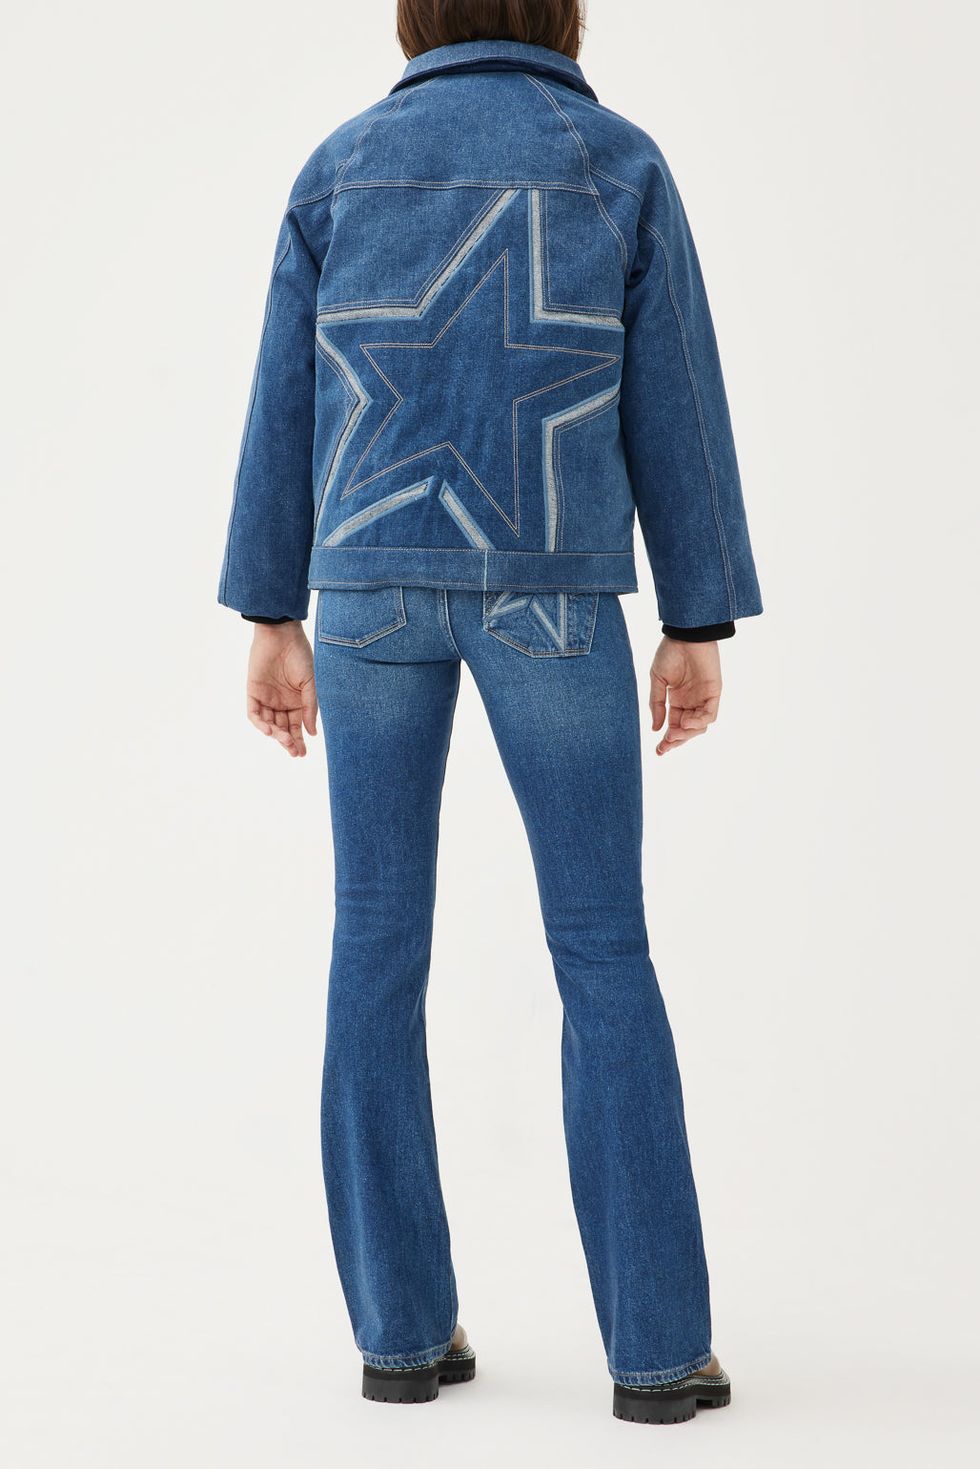 Moment DL1961 Sustainable Launch — Perfect Outfits Denim Skiwear Collection and Ski 2022 Denim